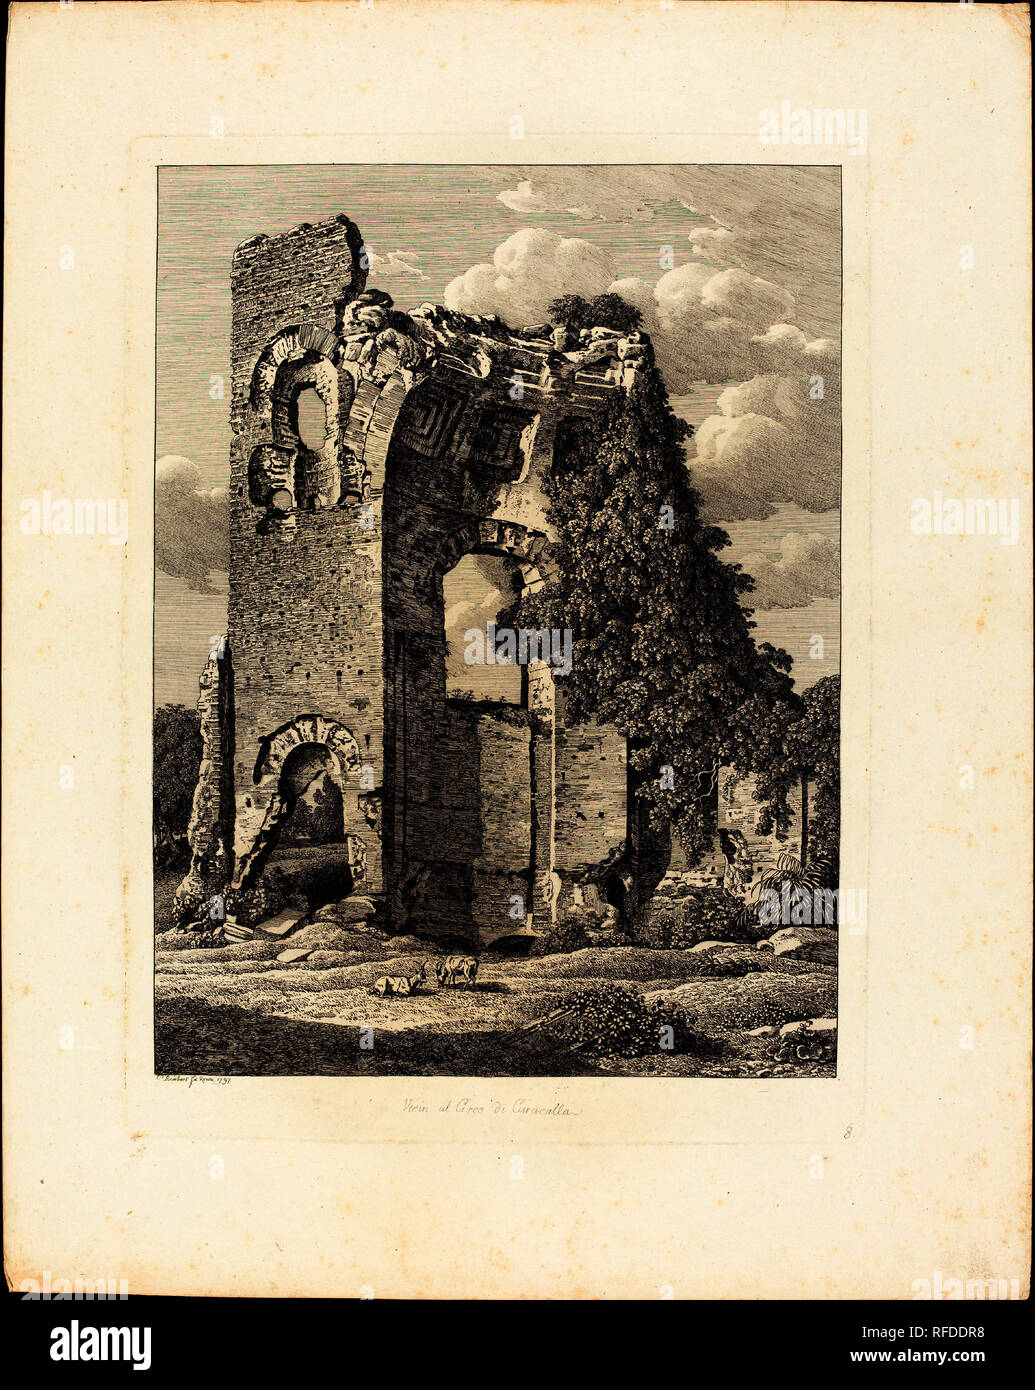 Vicino al Circo di Caracalla. Dated: 1797. Dimensions: plate: 38.1 x 27.9 cm (15 x 11 in.)  sheet: 39 x 49.2 cm (15 3/8 x 19 3/8 in.). Medium: etching on laid paper [proof]. Museum: National Gallery of Art, Washington DC. Author: Johann Christian Reinhart. Stock Photo